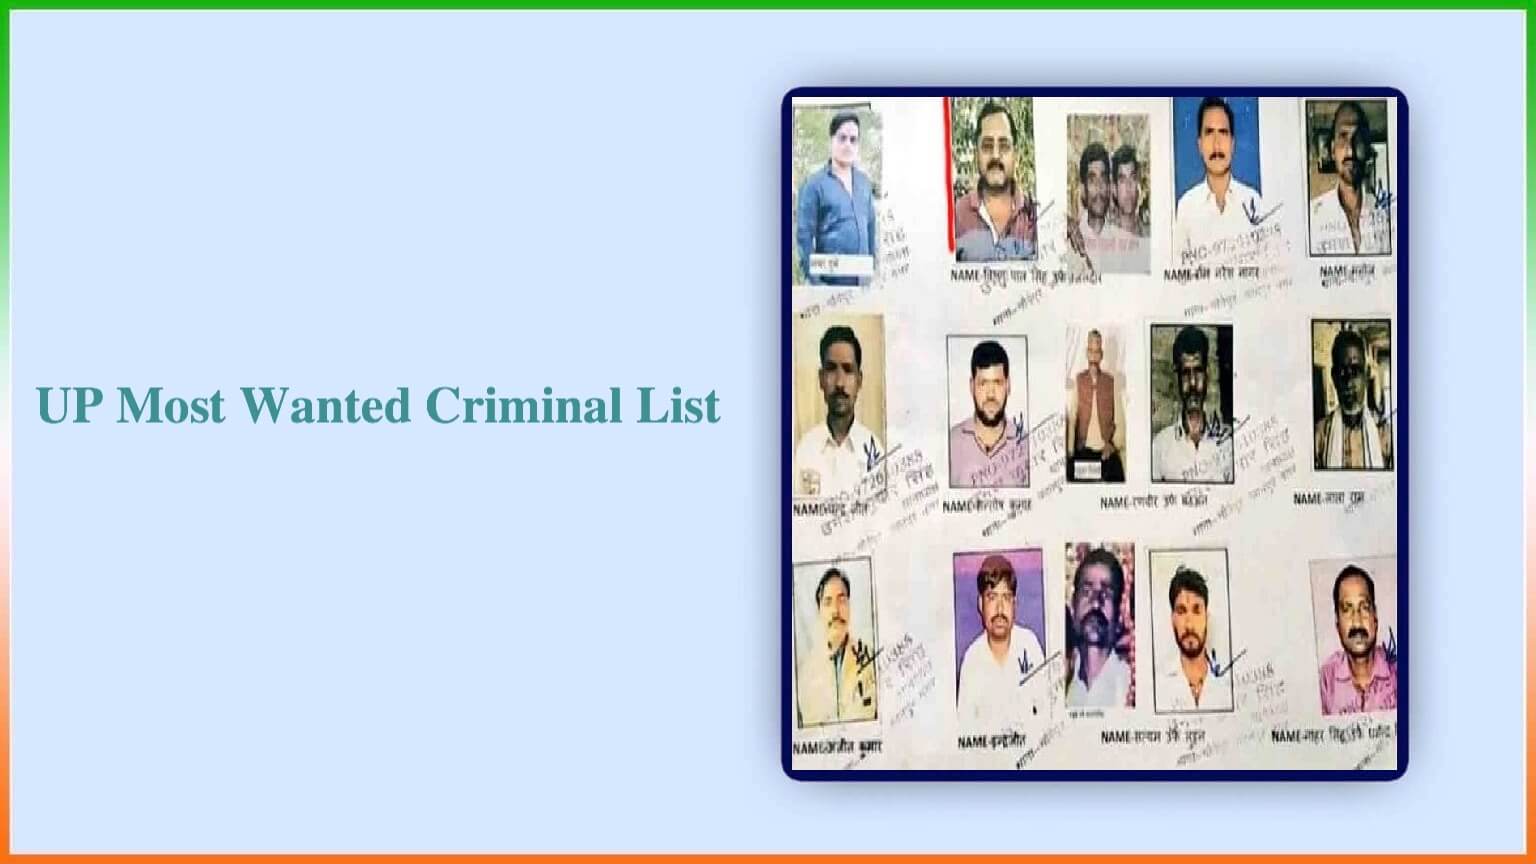 Up Most Wanted Criminal List